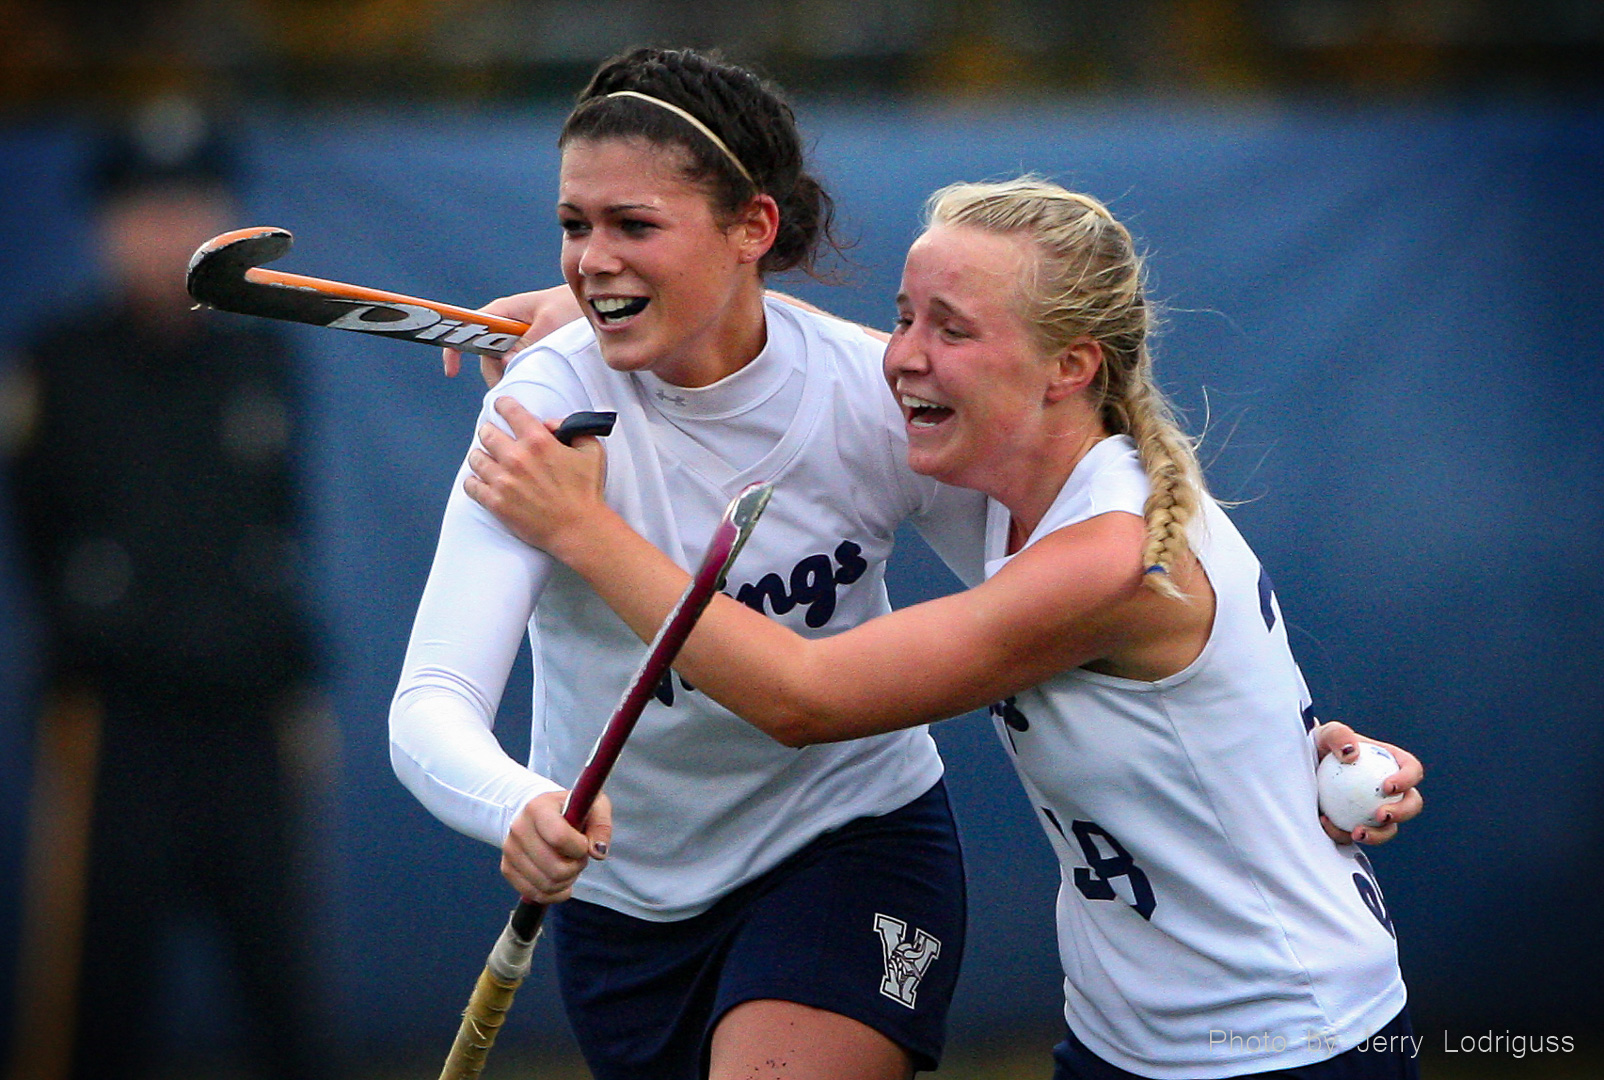 Eastern's Janine Kovach (left) and Colleen Petronchak celebrate Kovach's goal, Eastern's fourth, in their 4-2 win over Washington Township in a south Jersey group 4 field hockey semifinal game at Eastern High School in Voorhees, NJ on November 6, 2008.